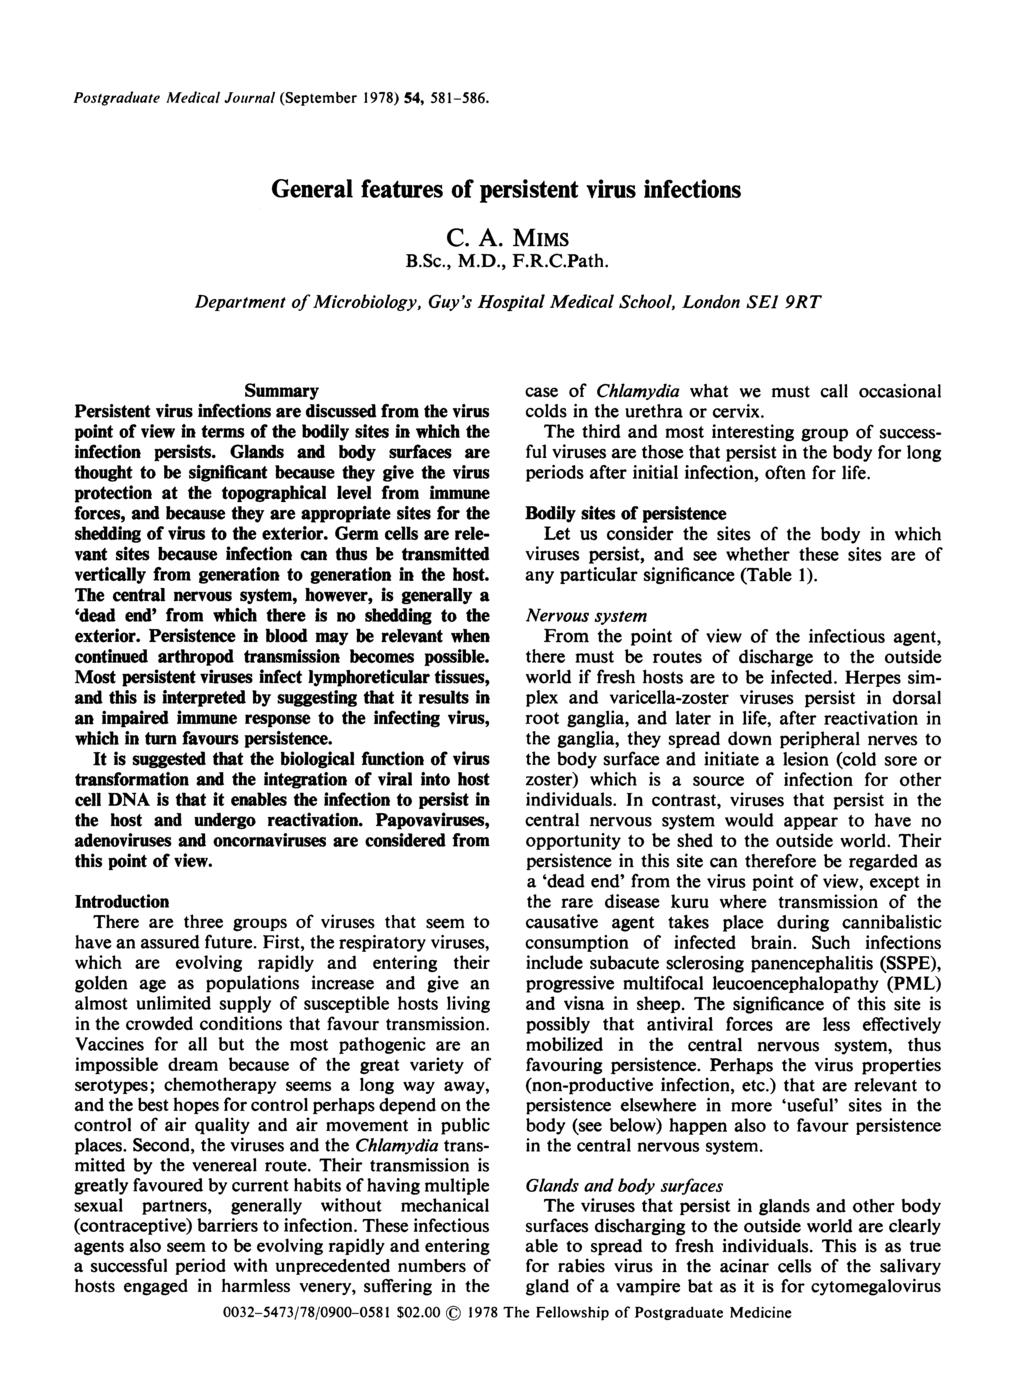 Postgraduate Medical Joiurnal (September 1978) 54, 581-586. General features of persistent virus infections C. A. MIMS B.Sc., M.D., F.R.C.Path.